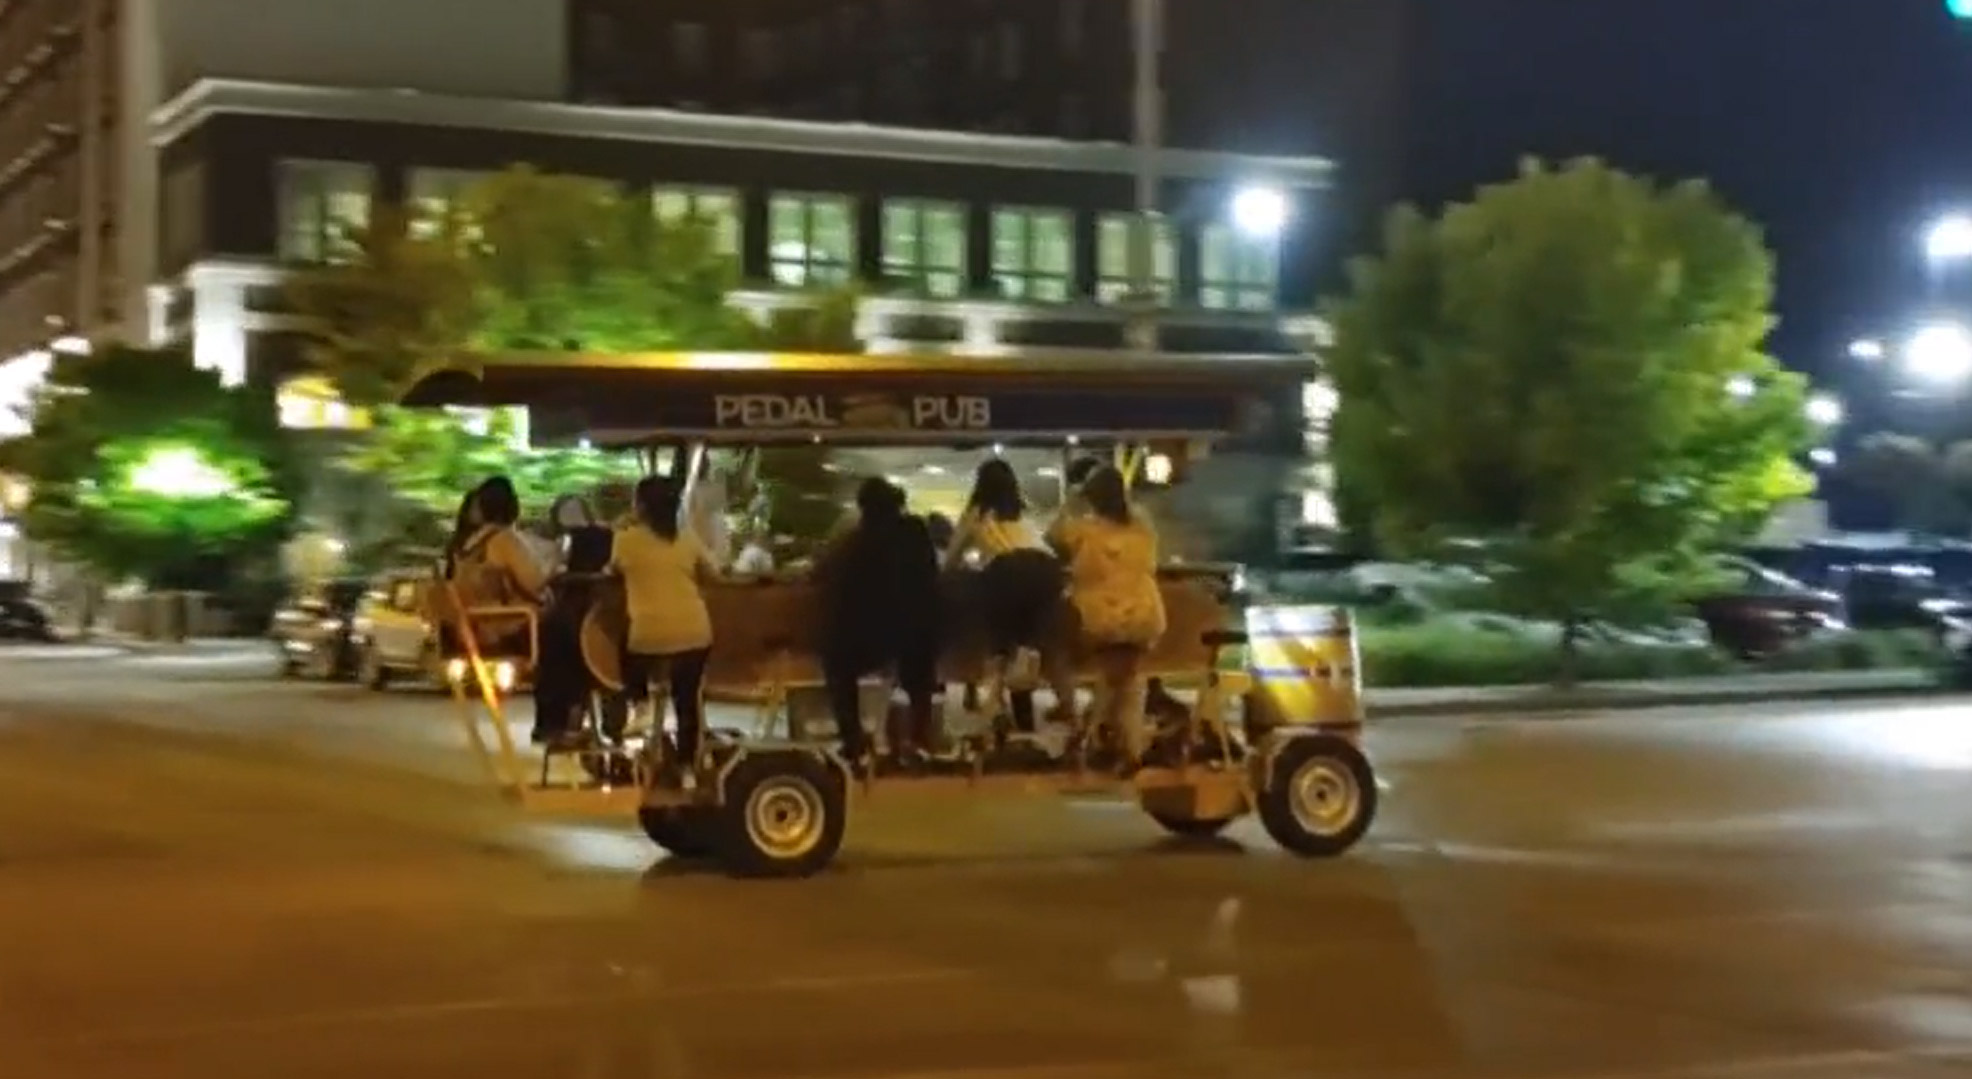 party bike in Quad Cities